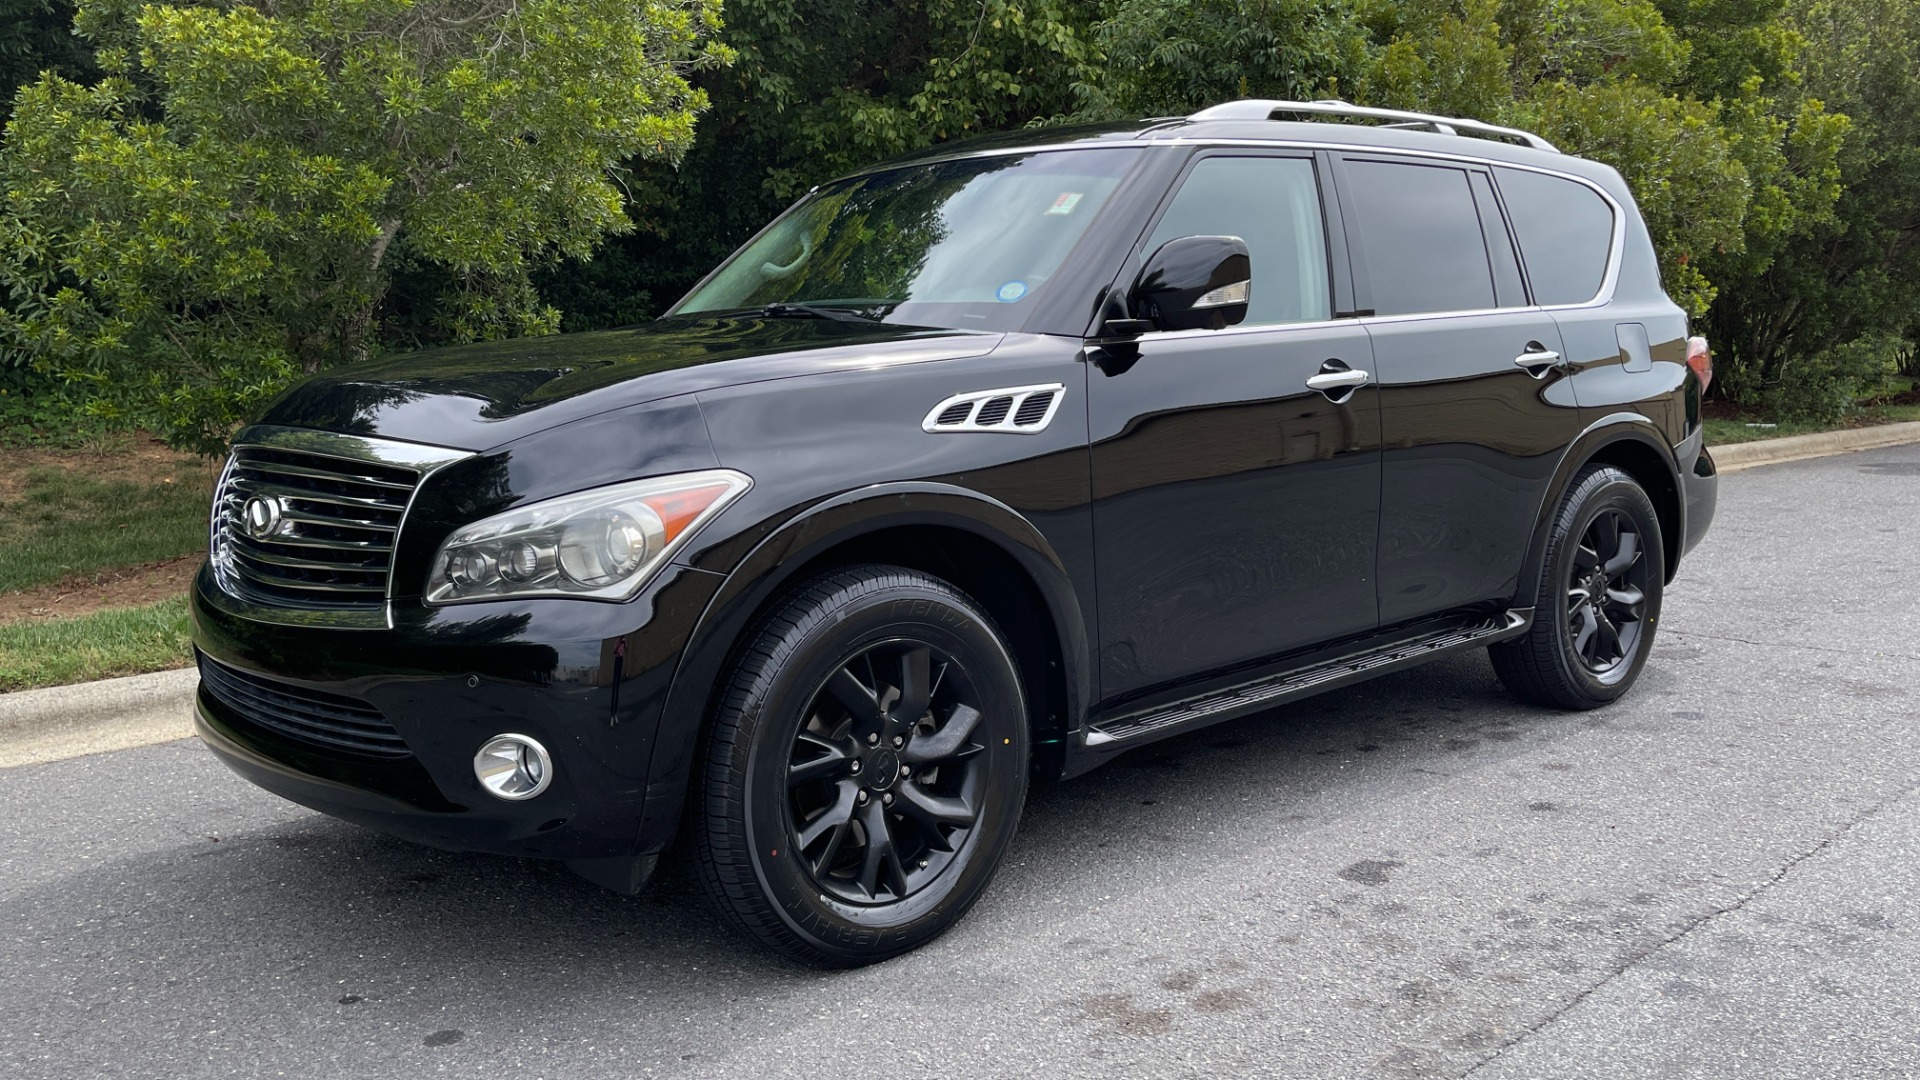 Used 2012 INFINITI QX56 7 PASSENGER / THEATER PACKAGE / HEATED SEATS / NAV / REARVIEW for sale $17,900 at Formula Imports in Charlotte NC 28227 50